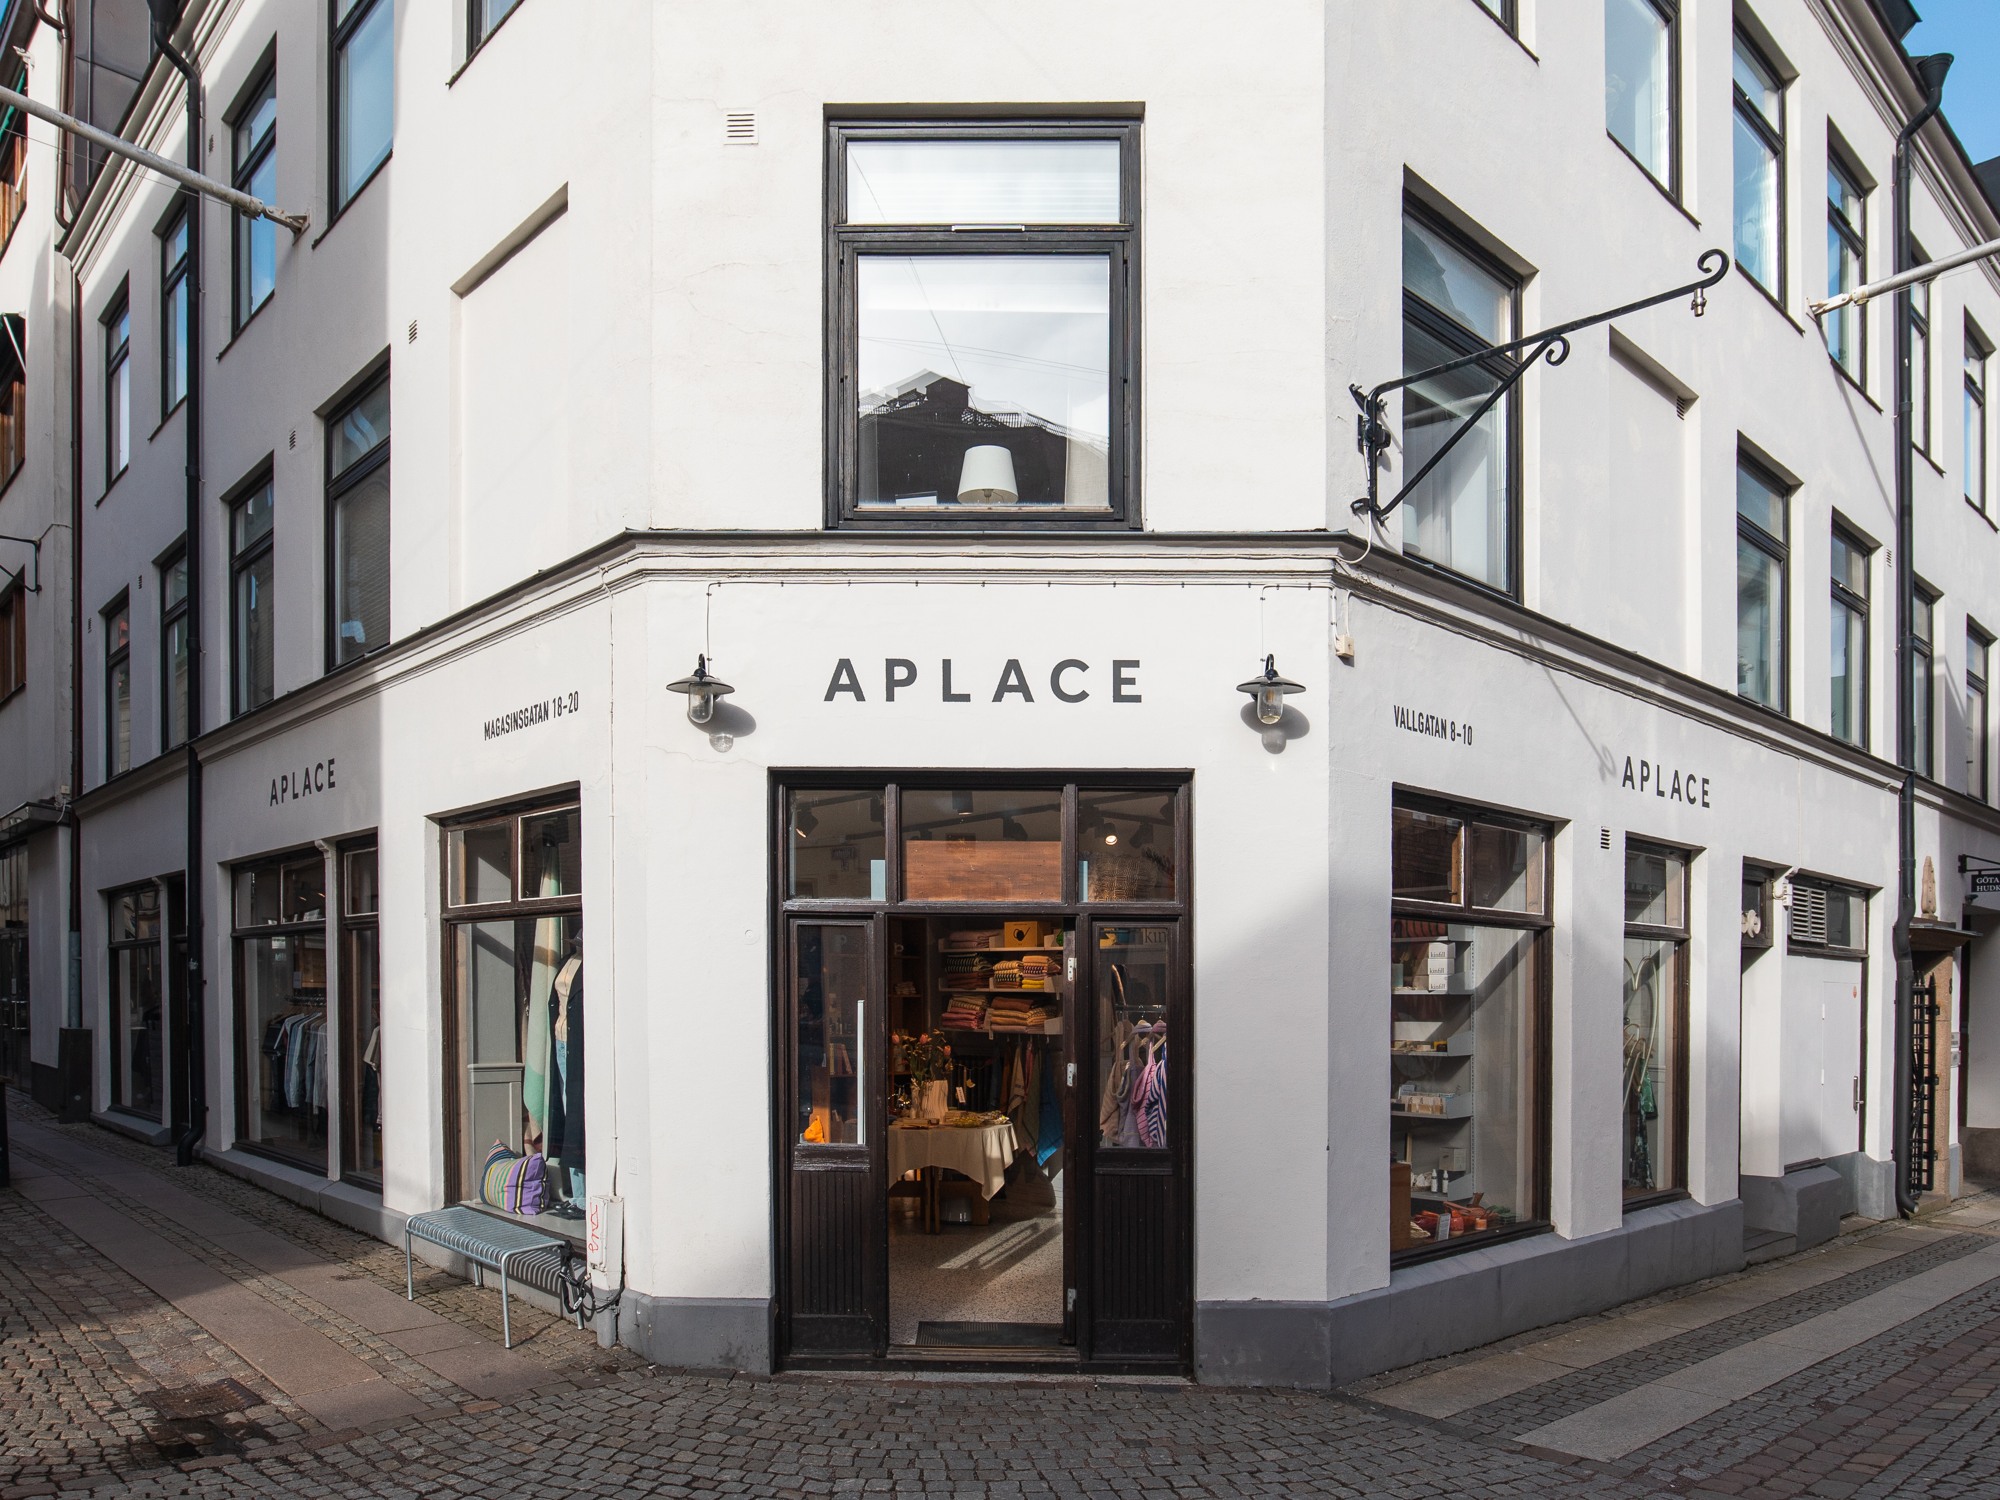 Exterior of the shop Aplace in Gothenburg, Sweden.